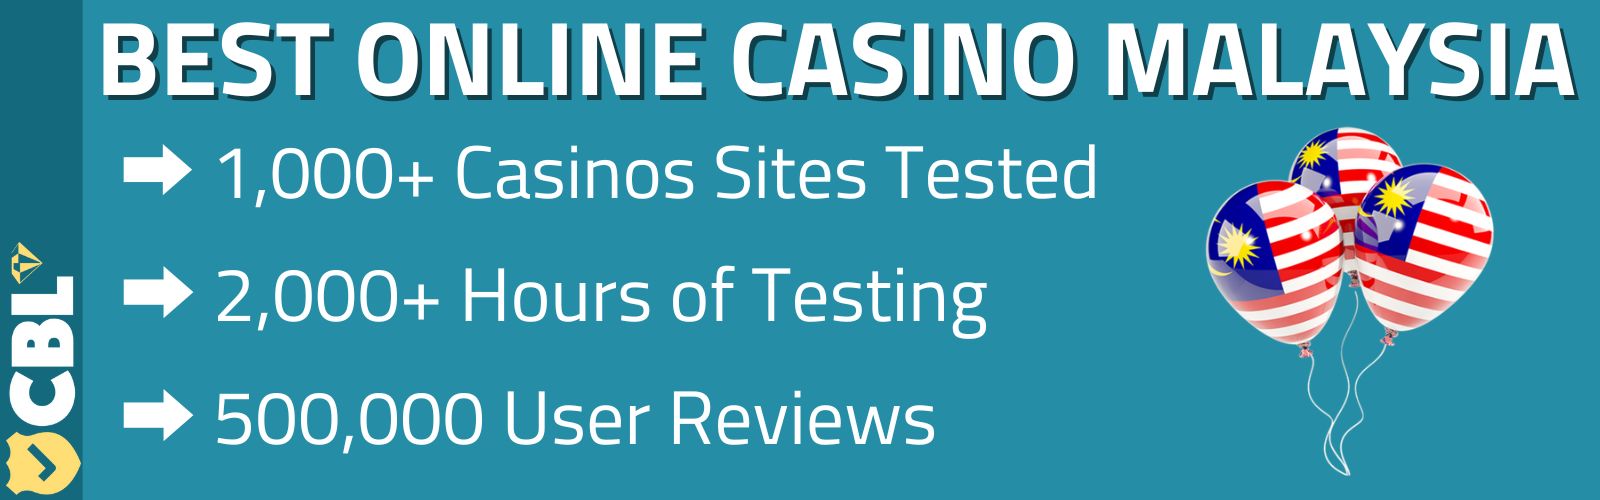 Best Online Casino Sites in Malaysia